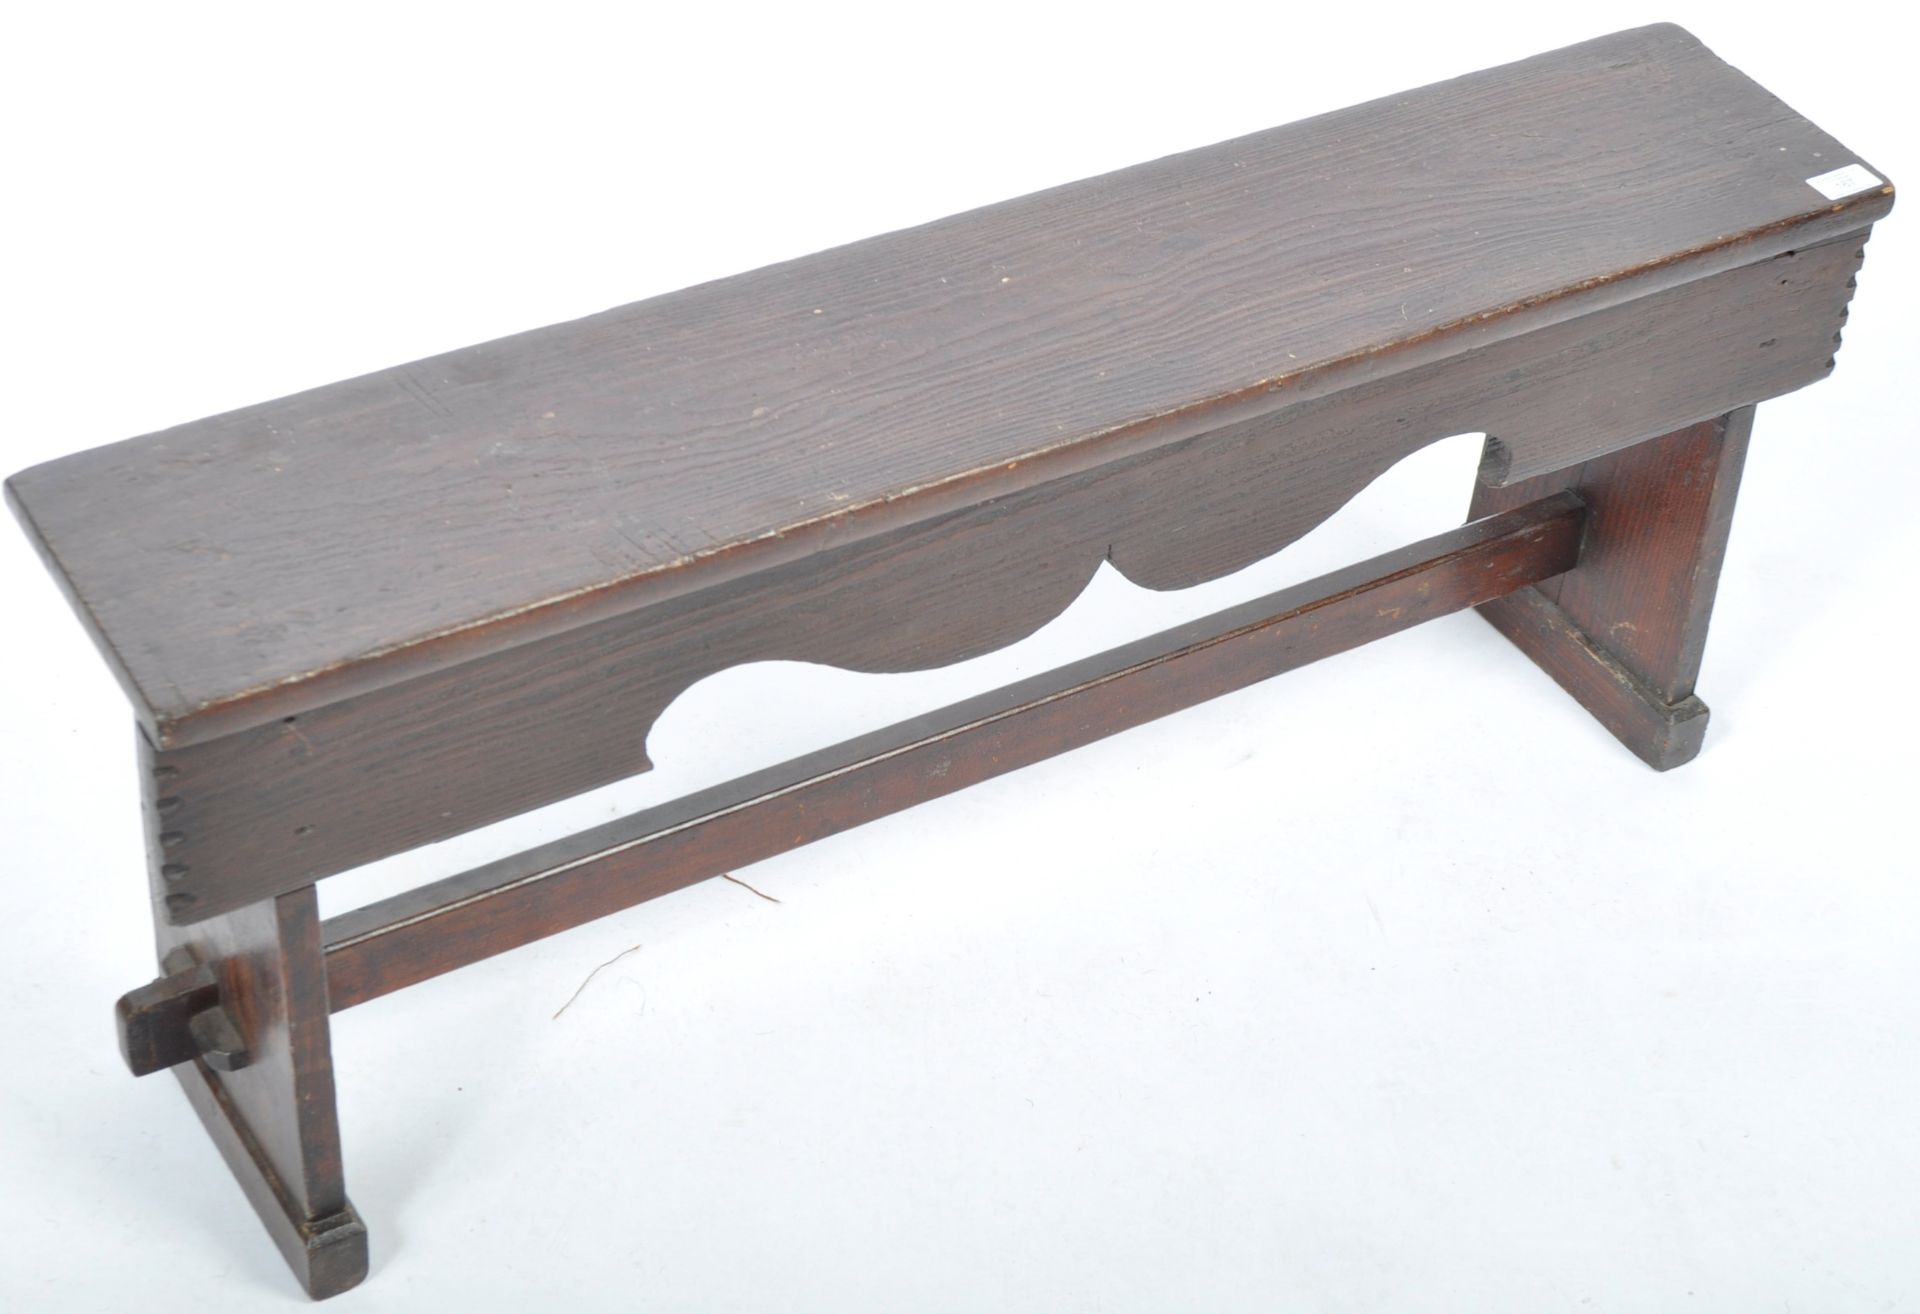 18TH CENTURY GEORGIAN COUNTRY OAK BENCH OF GOOD PROPORTIONS - Image 2 of 4